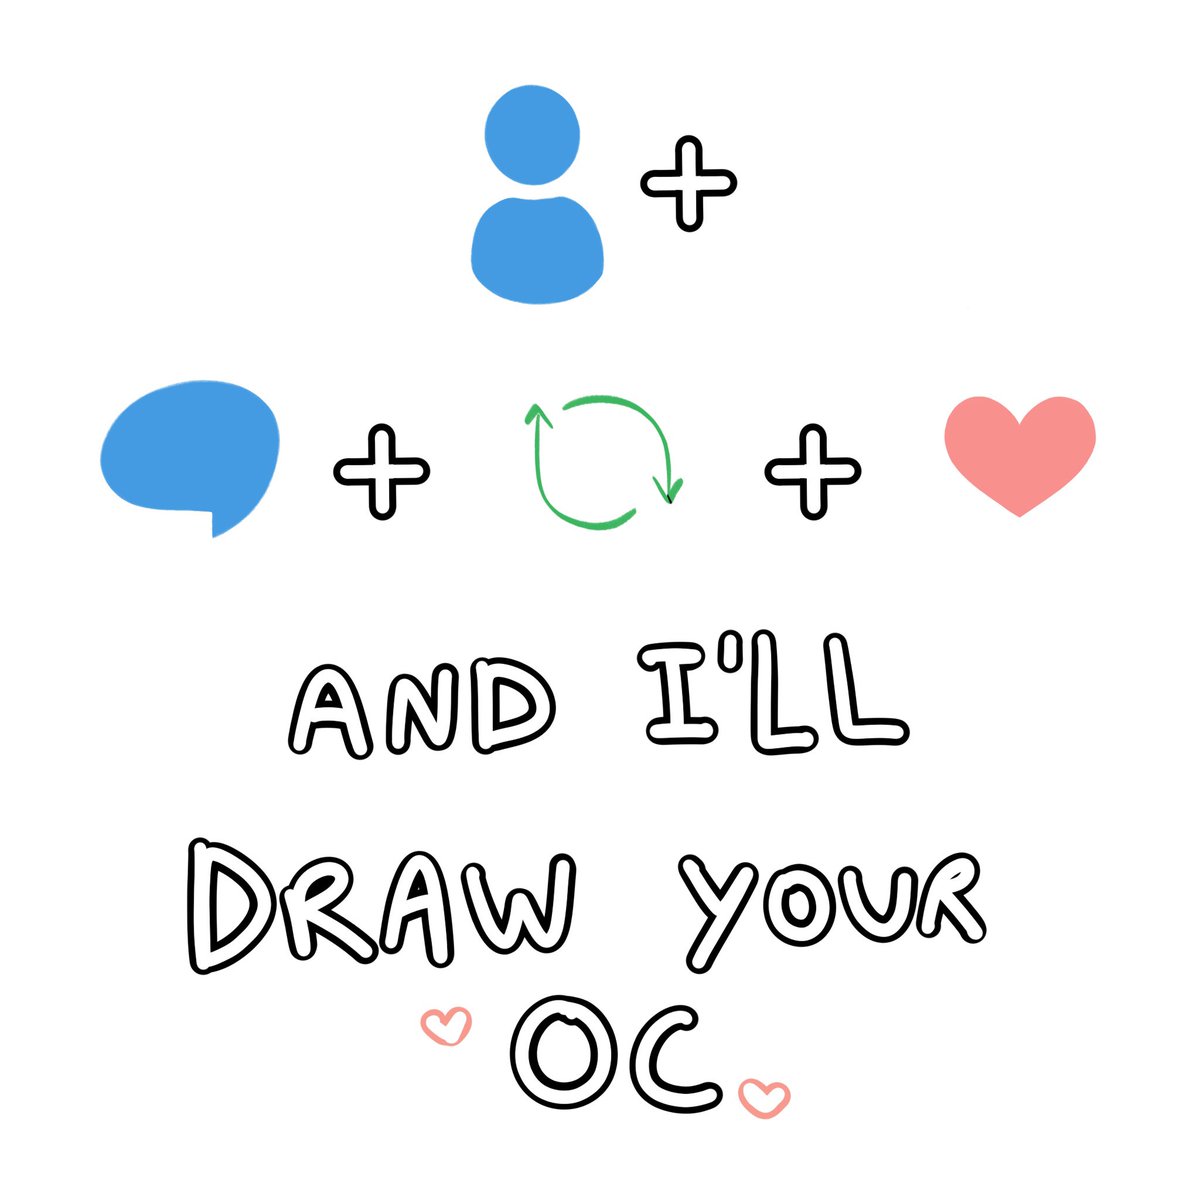 I want to draw during livestream tonight.

Share with me your oc/avatar pics!

#arttwt #ocart